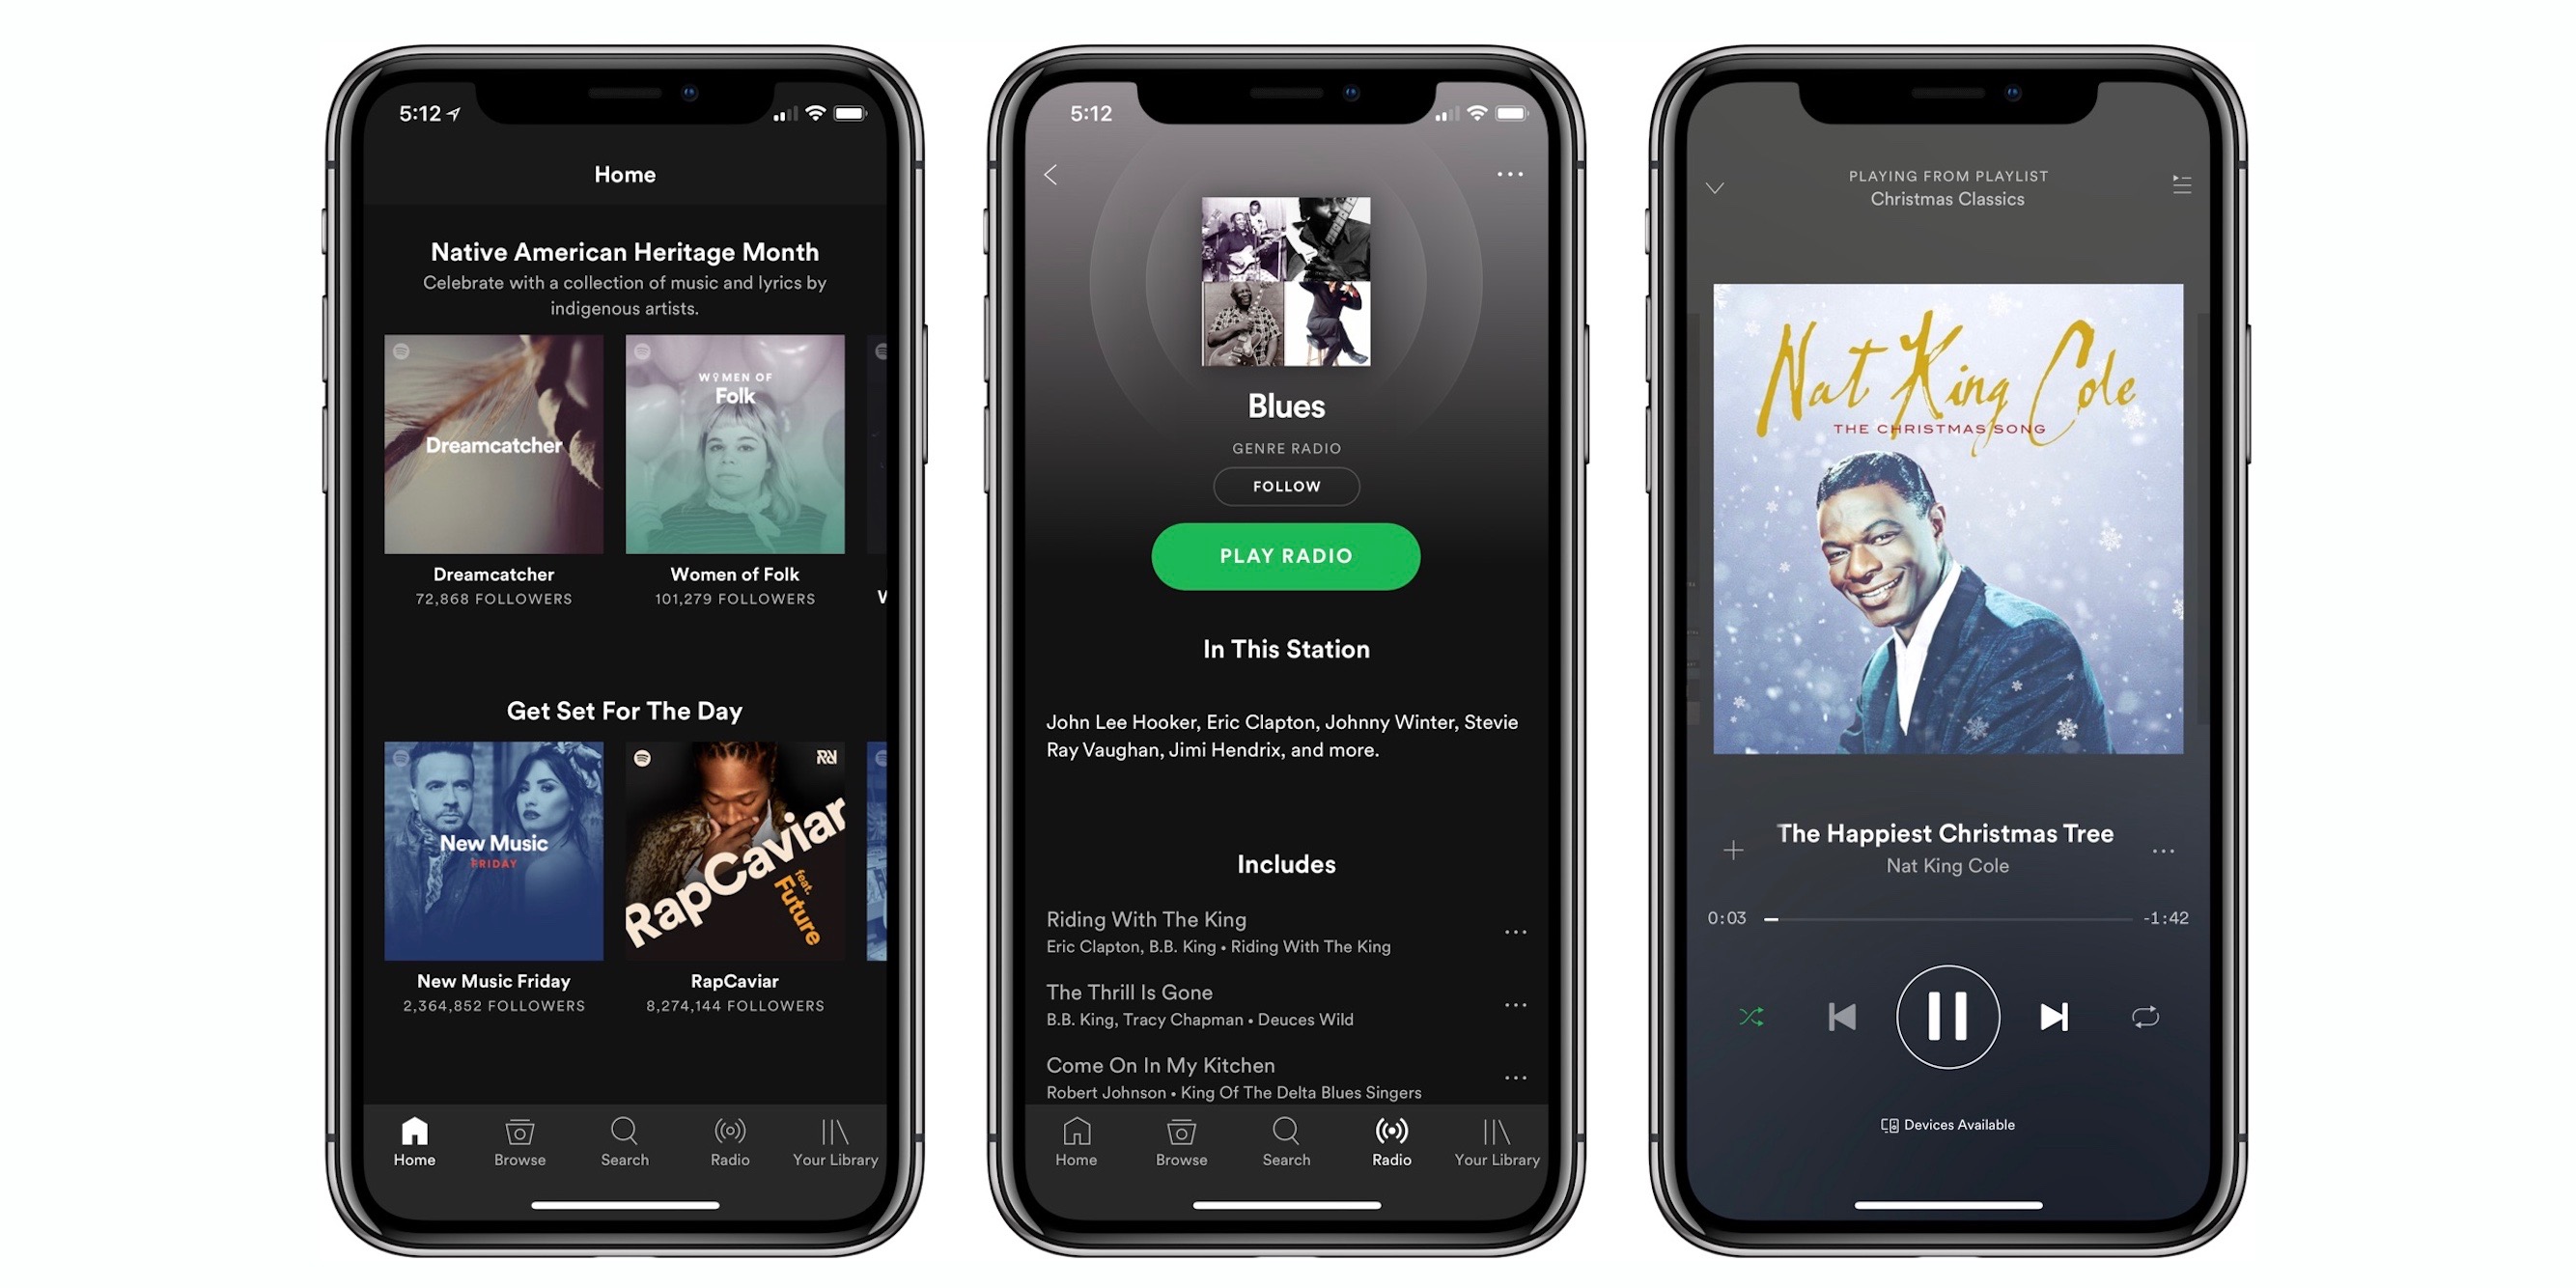 Updated interface for Spotify on iPhone X